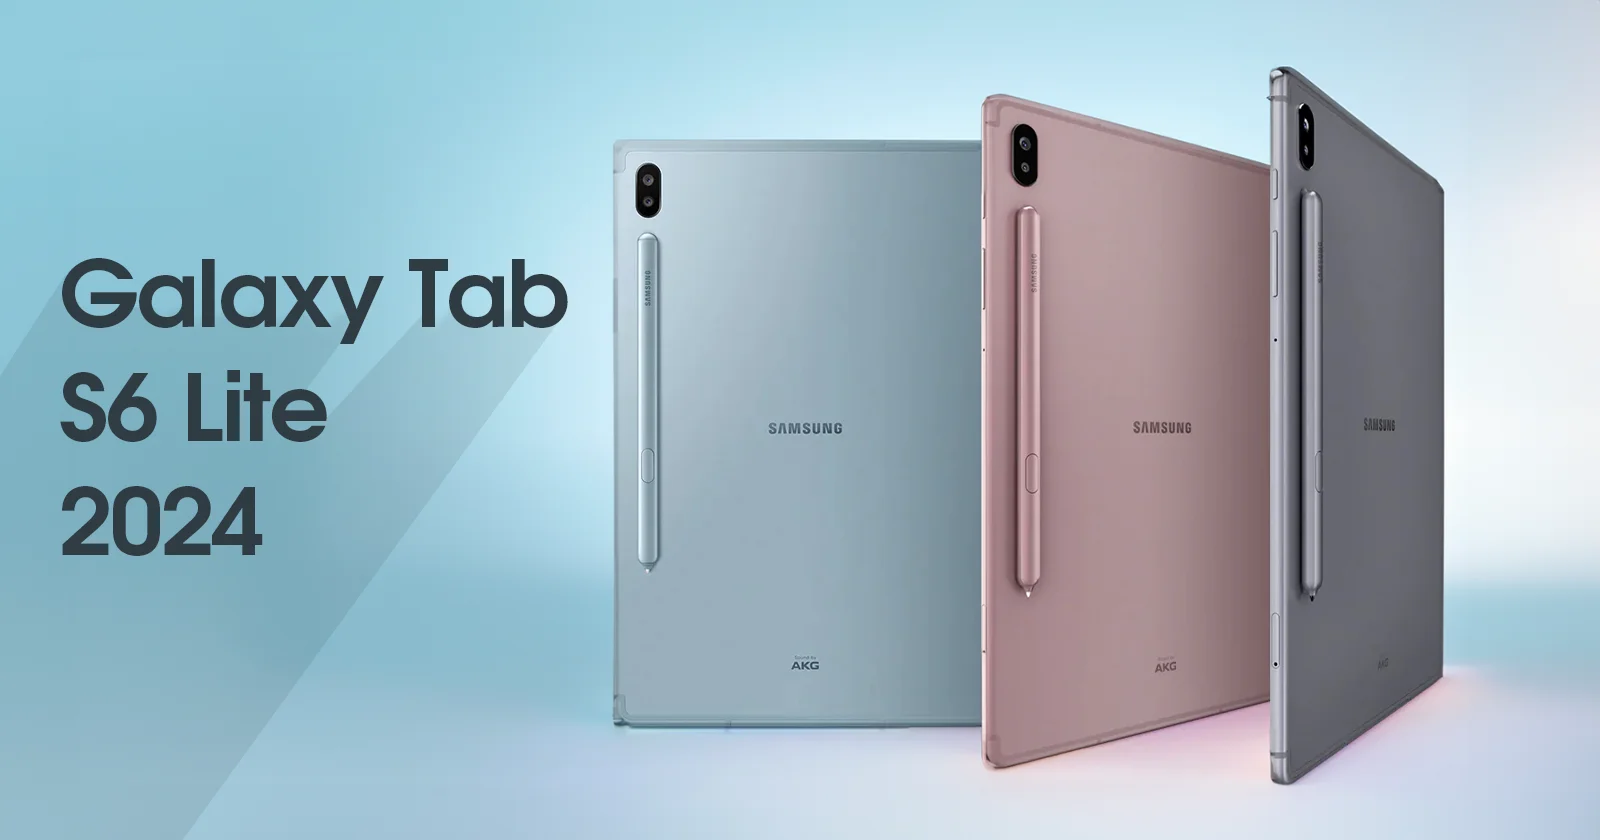 Samsung will re release the Galaxy Tab S6 Lite in 2024